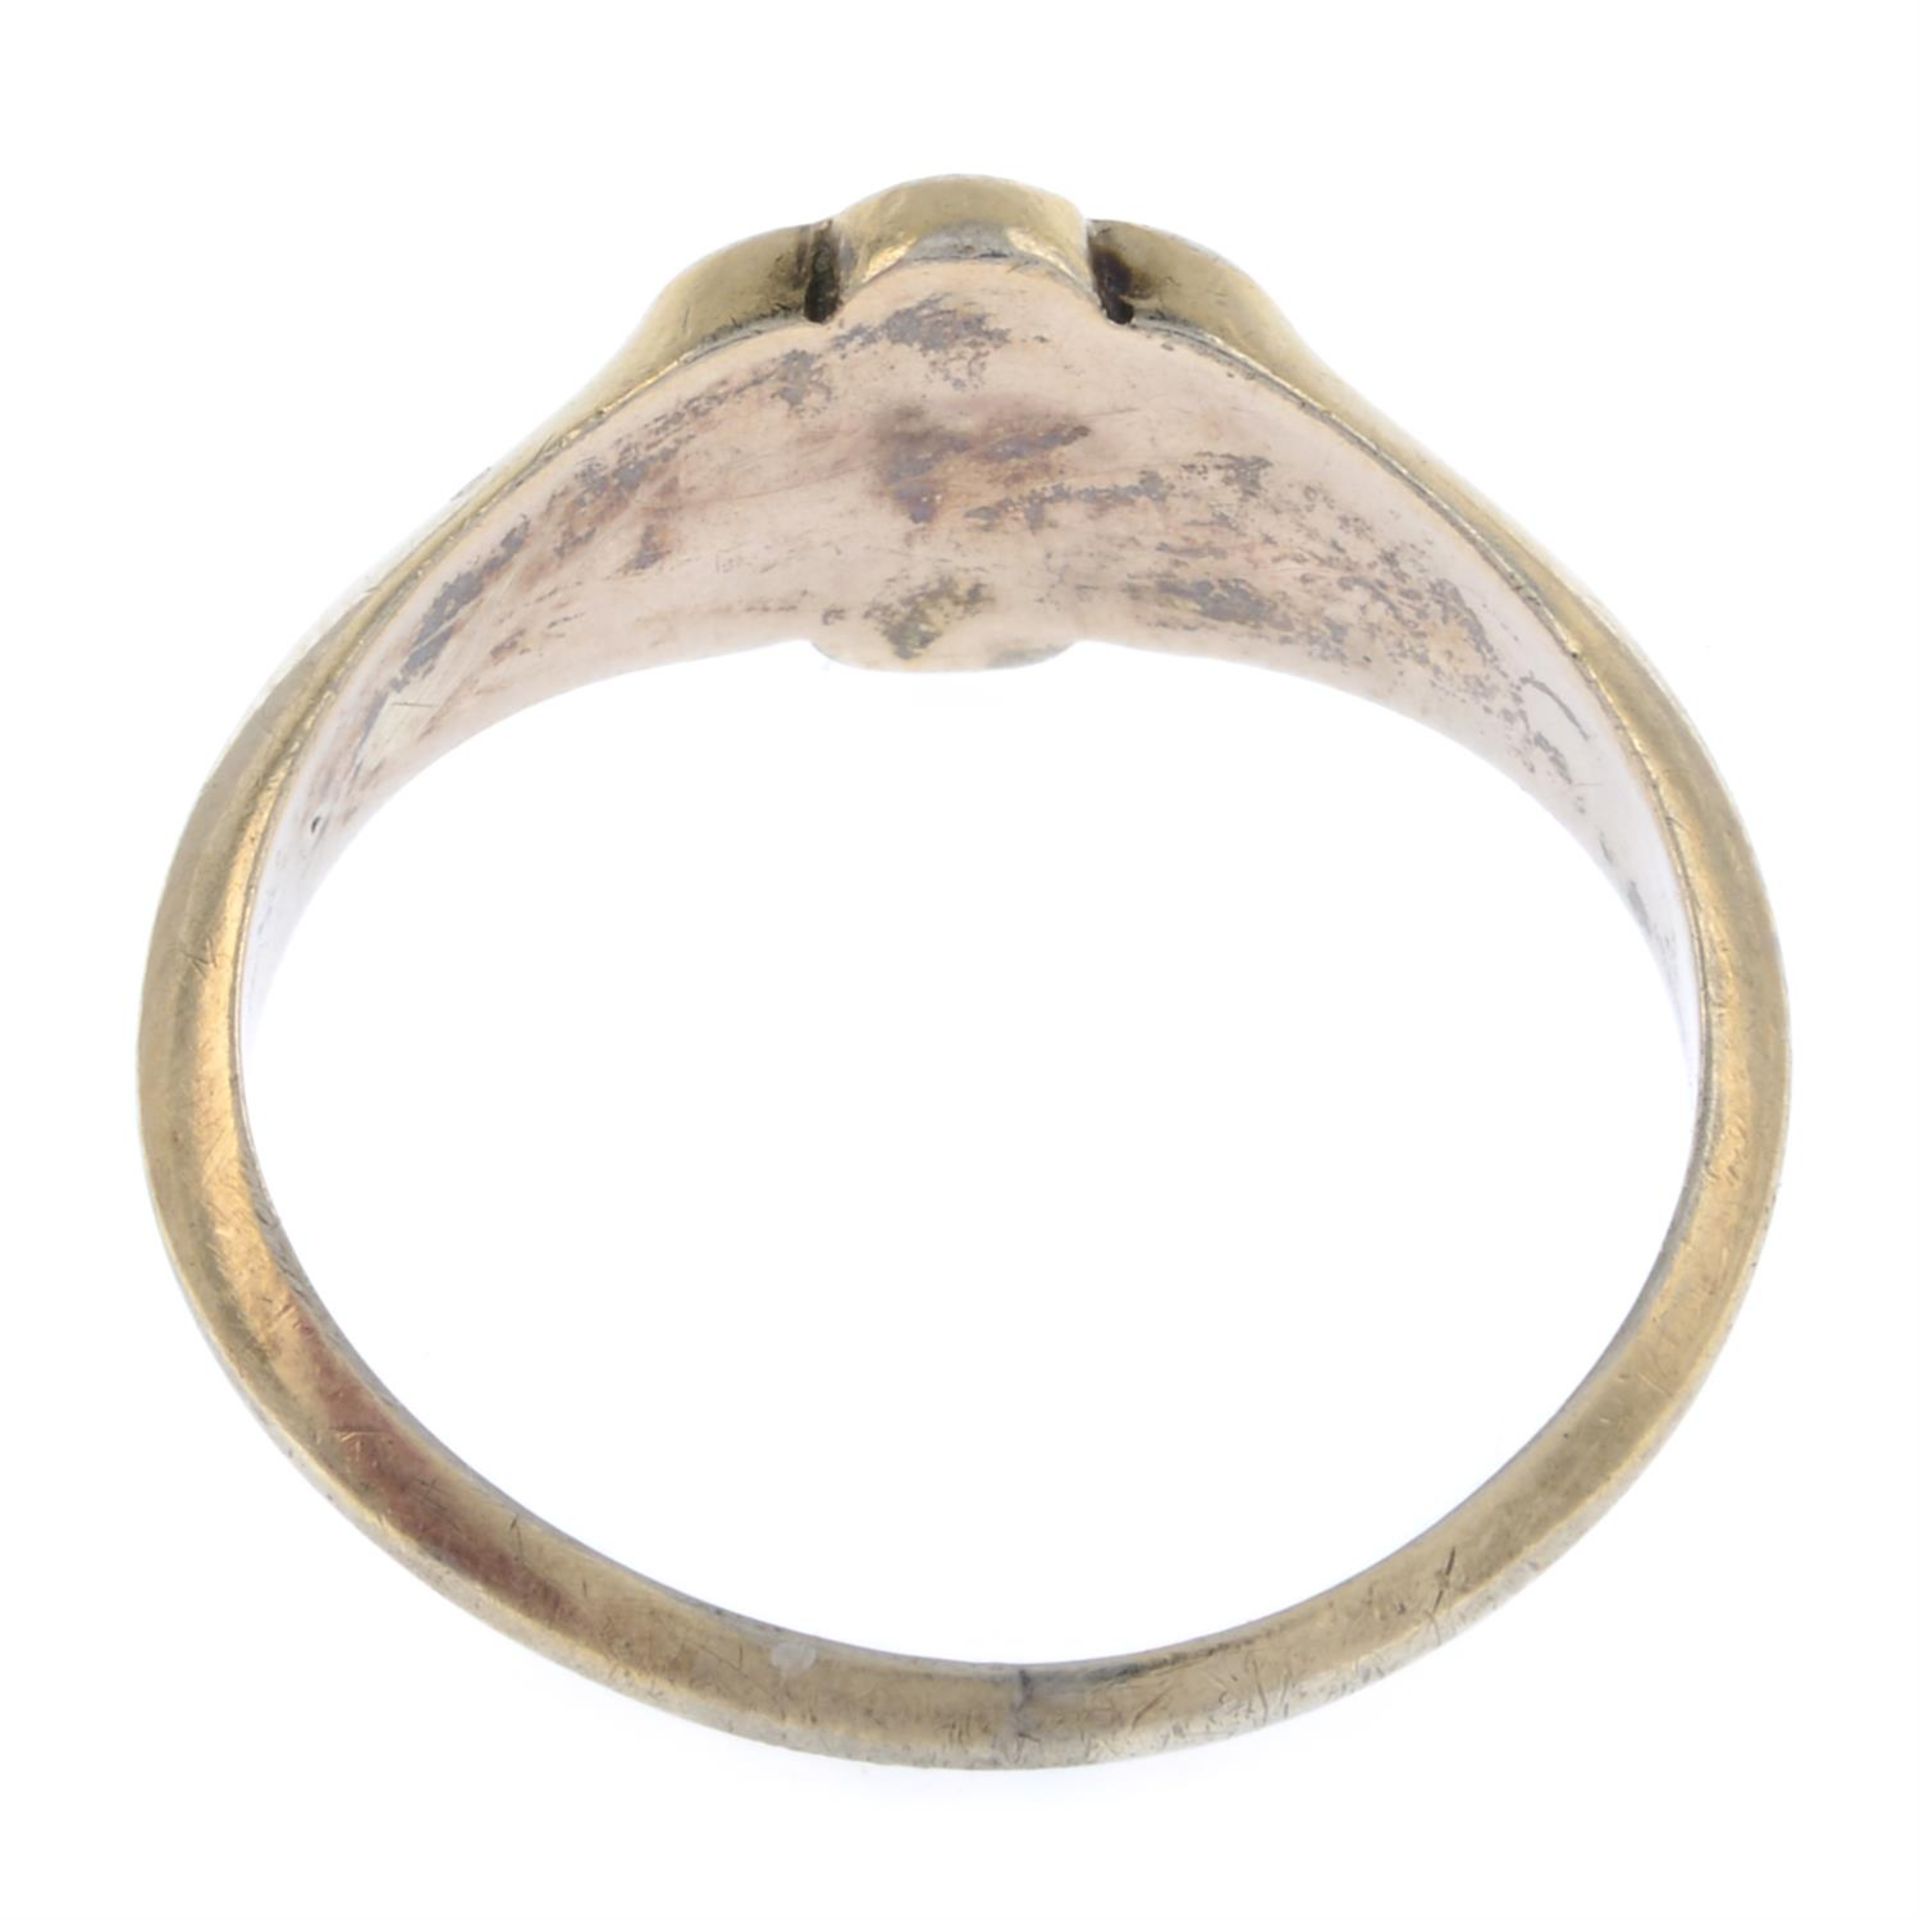 Early 20th gold 'forget me not' signet ring - Image 2 of 2